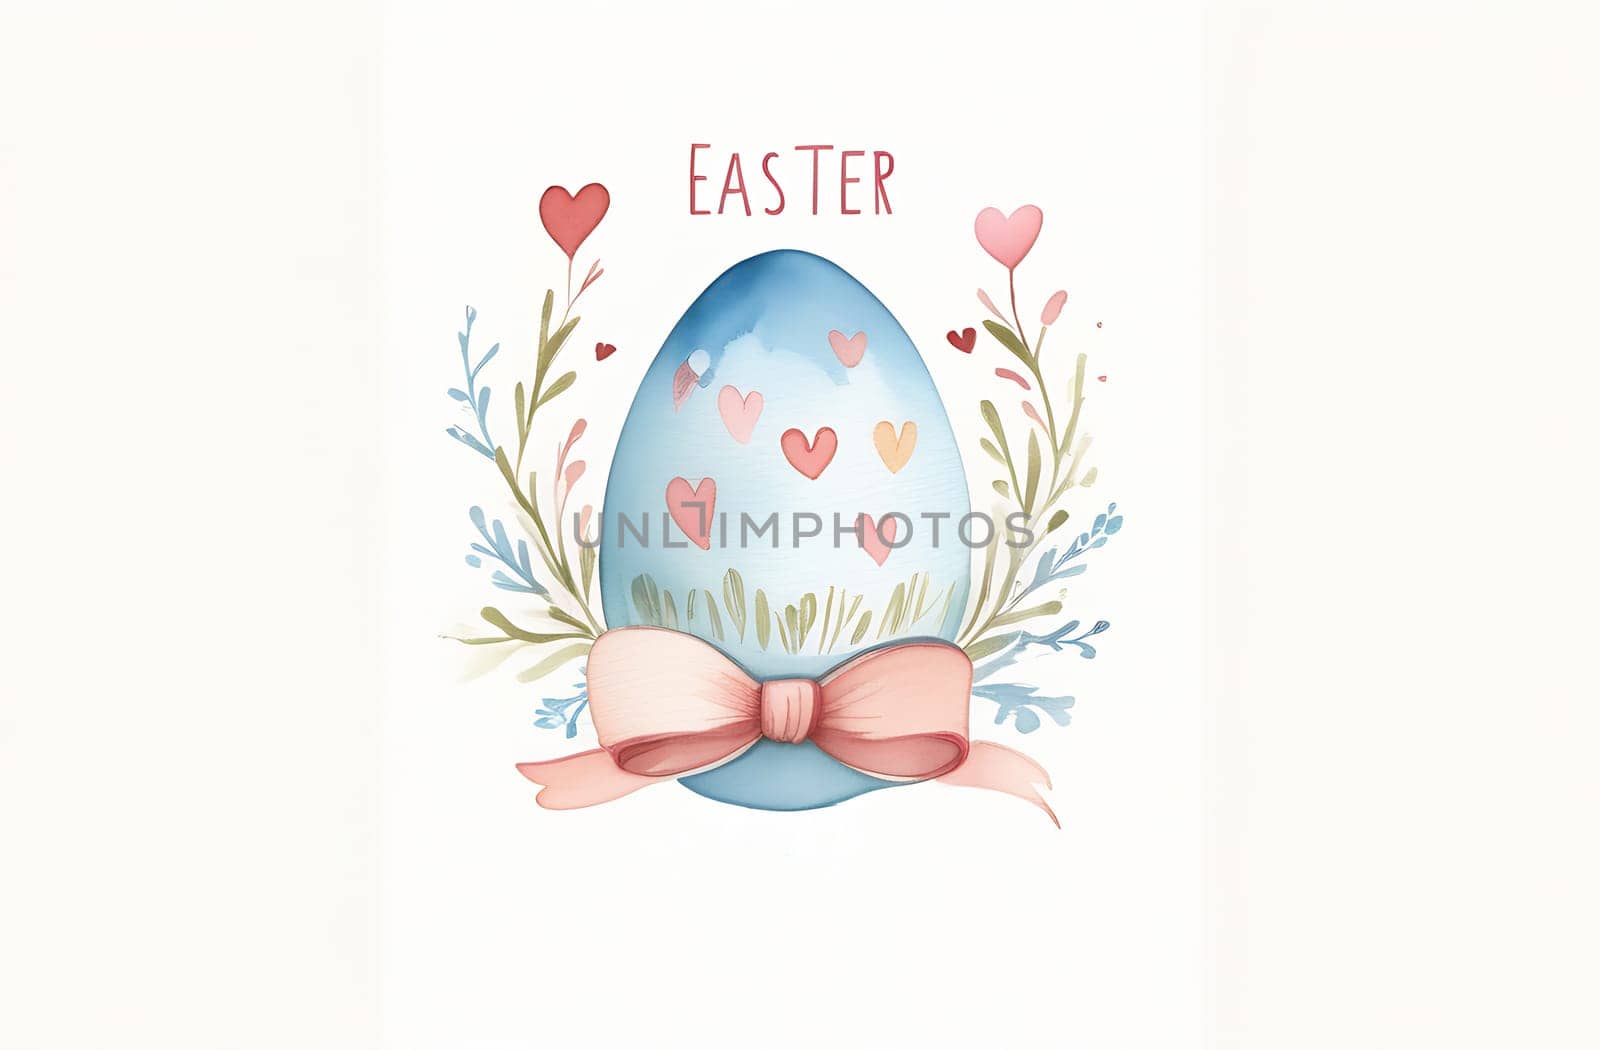 One Easter egg tied with a pink bow in watercolor painting technique, isolated on a white background, pastel color scheme by claire_lucia